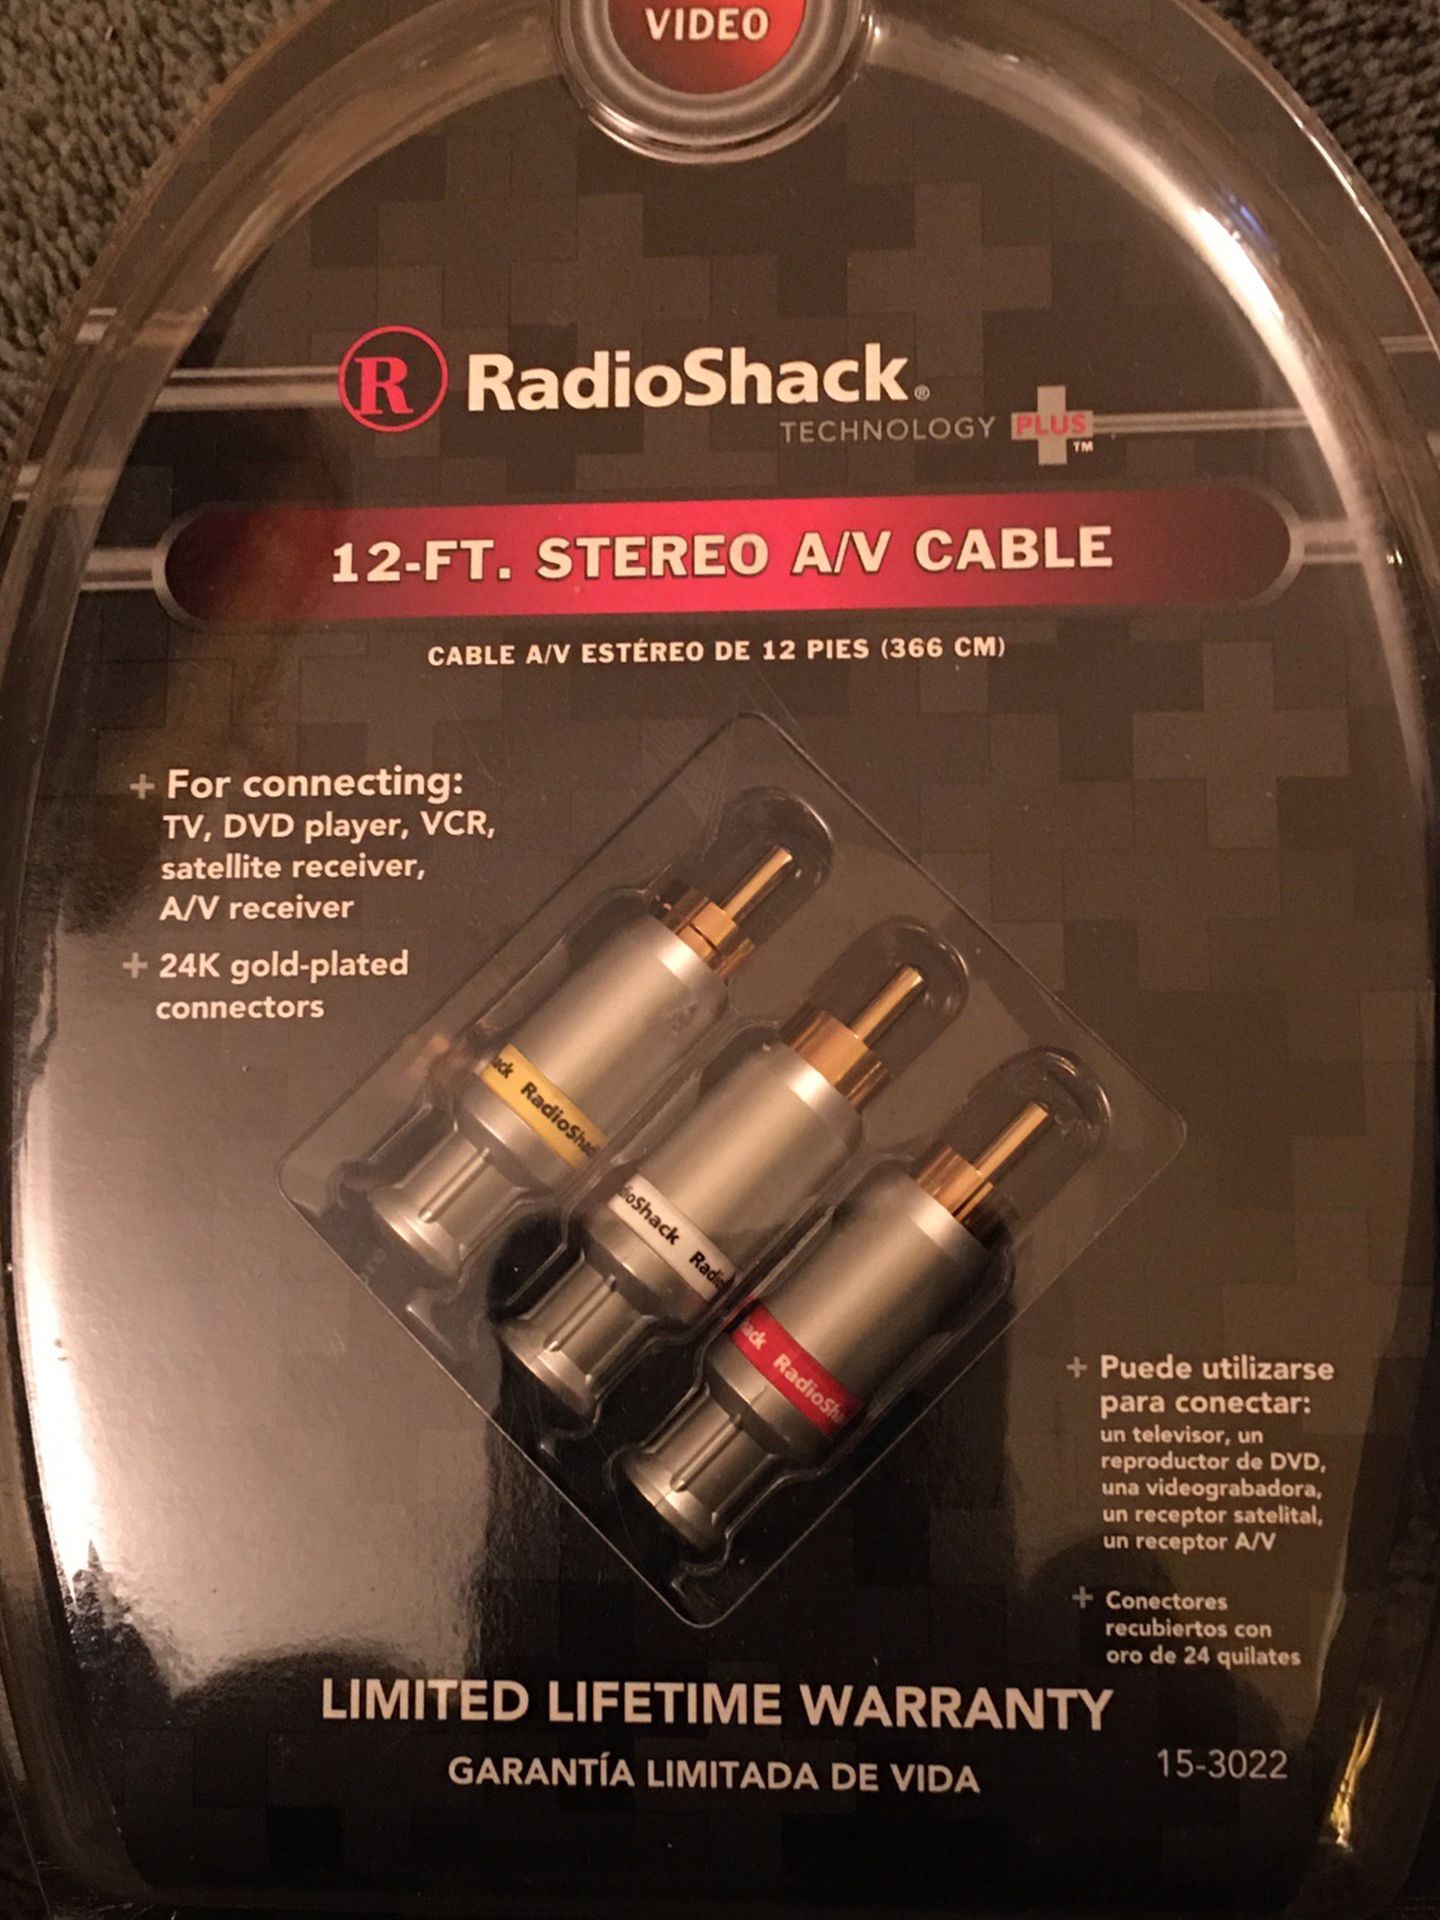 BRAND NEW NEVER USED RADIO SHACK 12-FT STEREO A/V CABLE $10.00